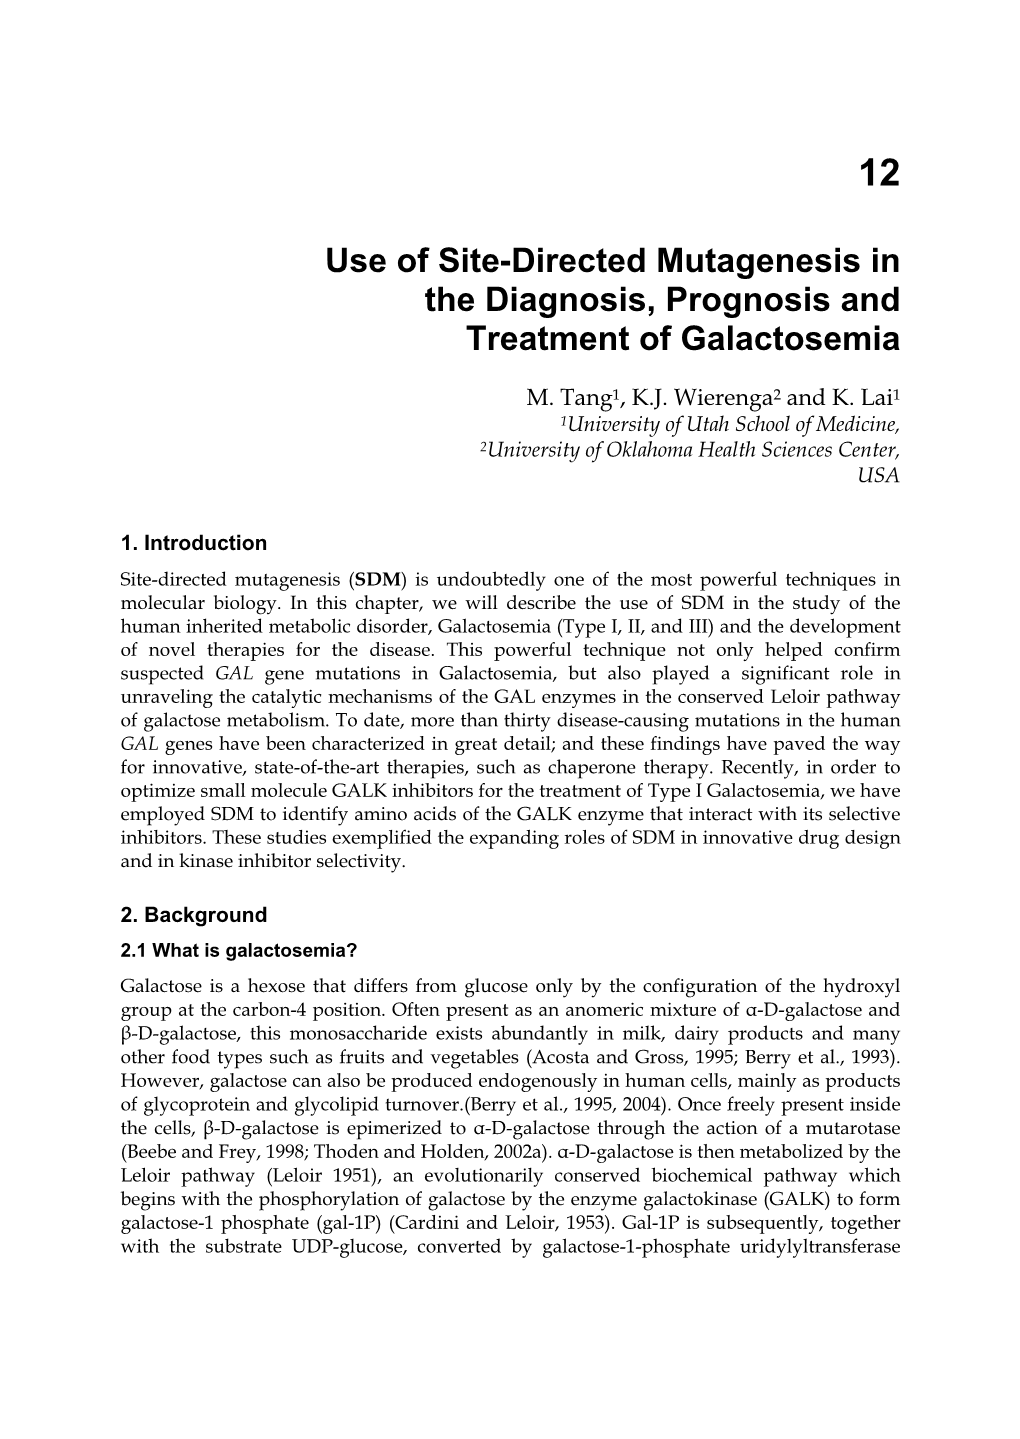 Use of Site-Directed Mutagenesis in the Diagnosis, Prognosis and Treatment of Galactosemia